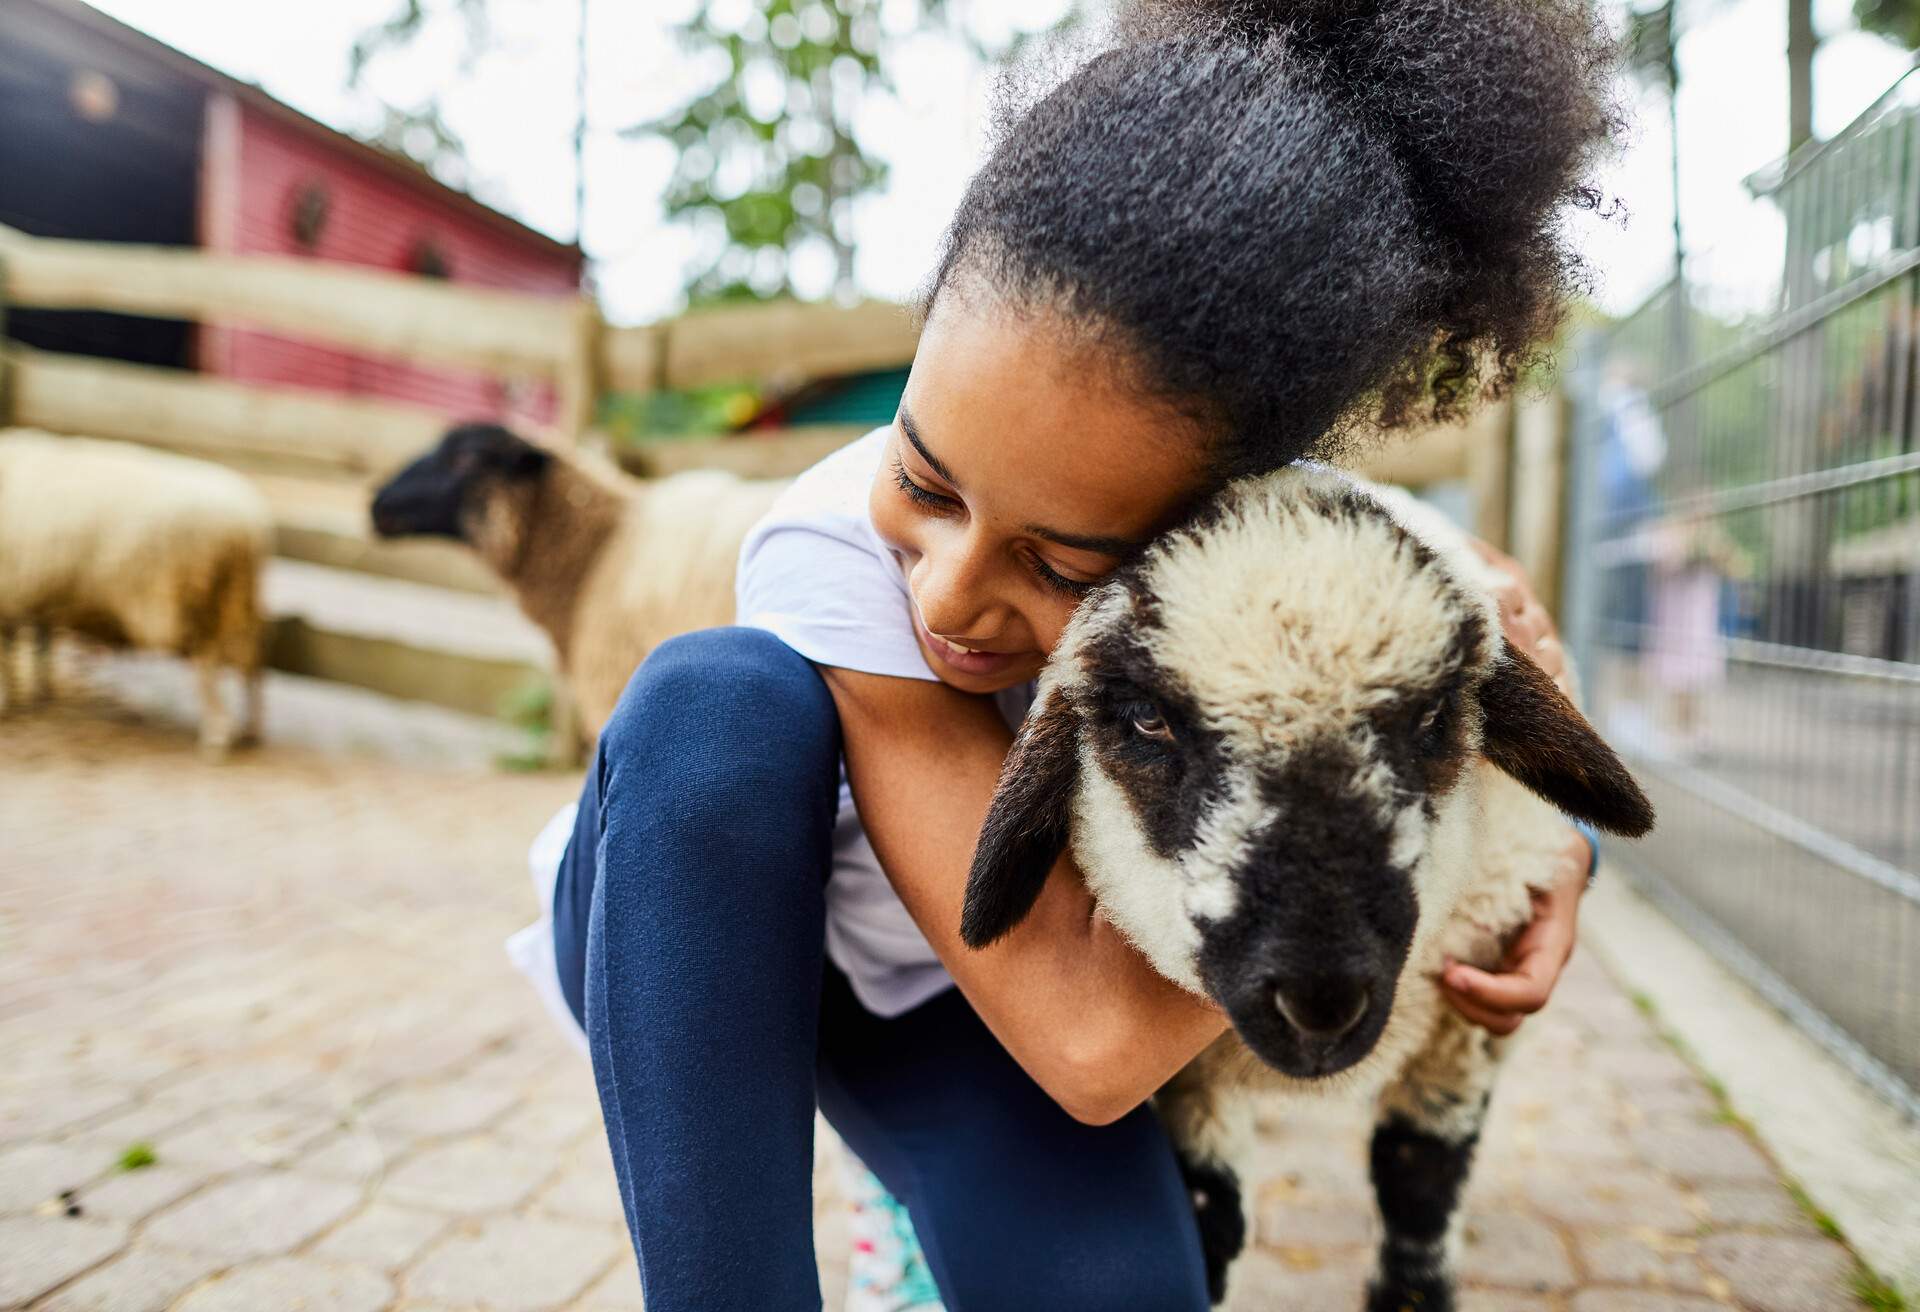 THEME_PETTING-ZOO_CHILD_GettyImages-1064200044